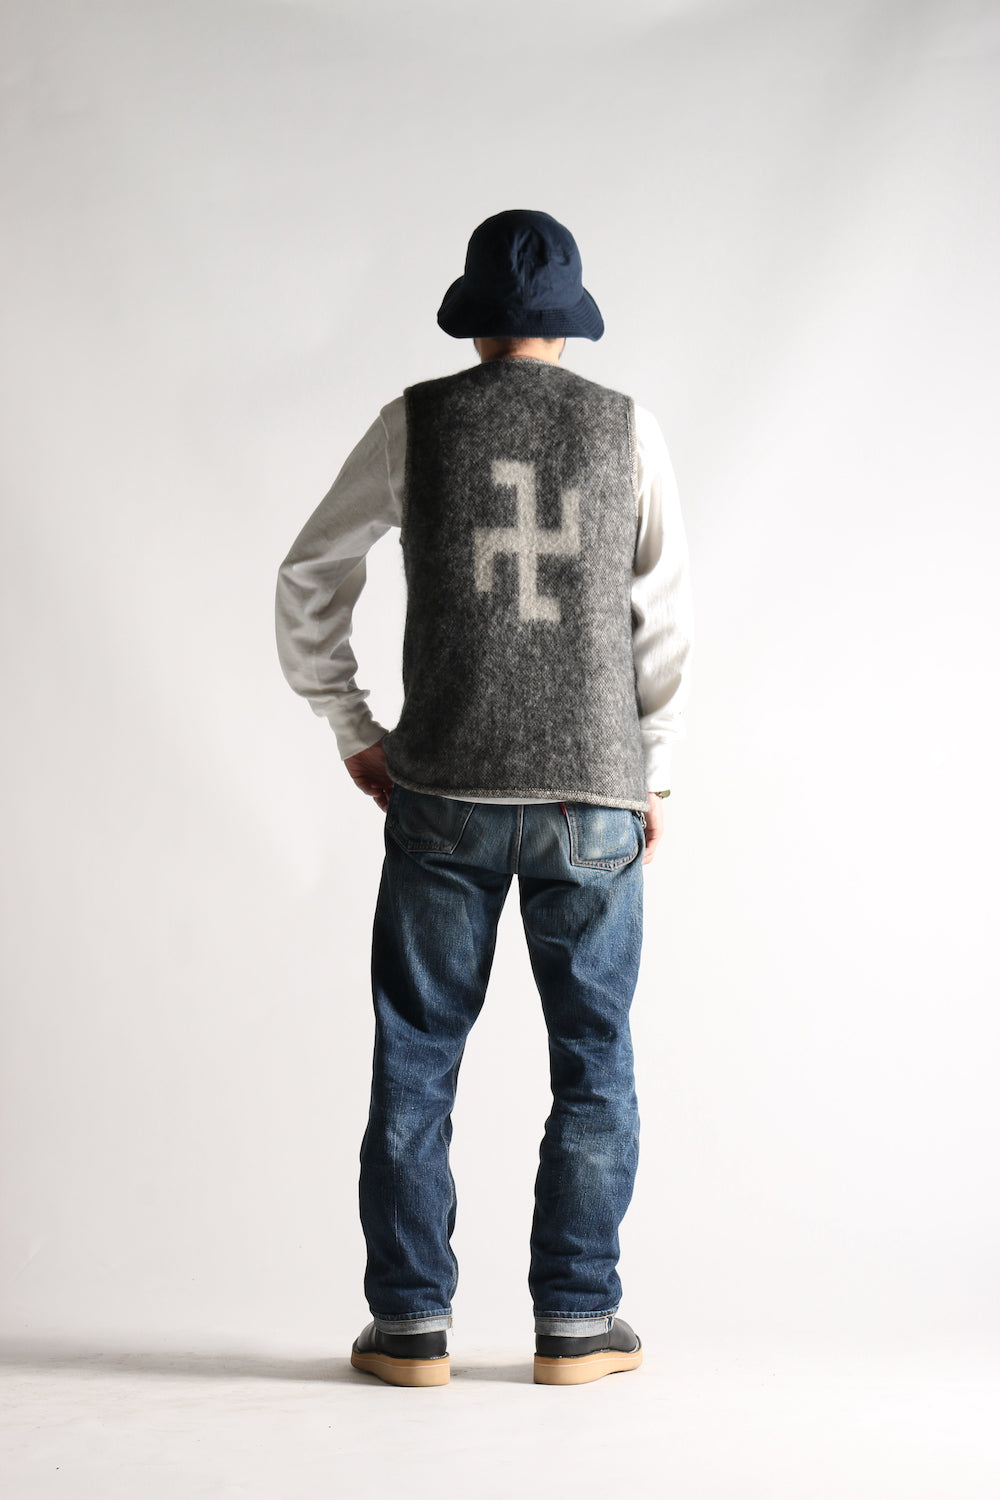 SWASTIKA MOHAIR VEST - GRY - May club